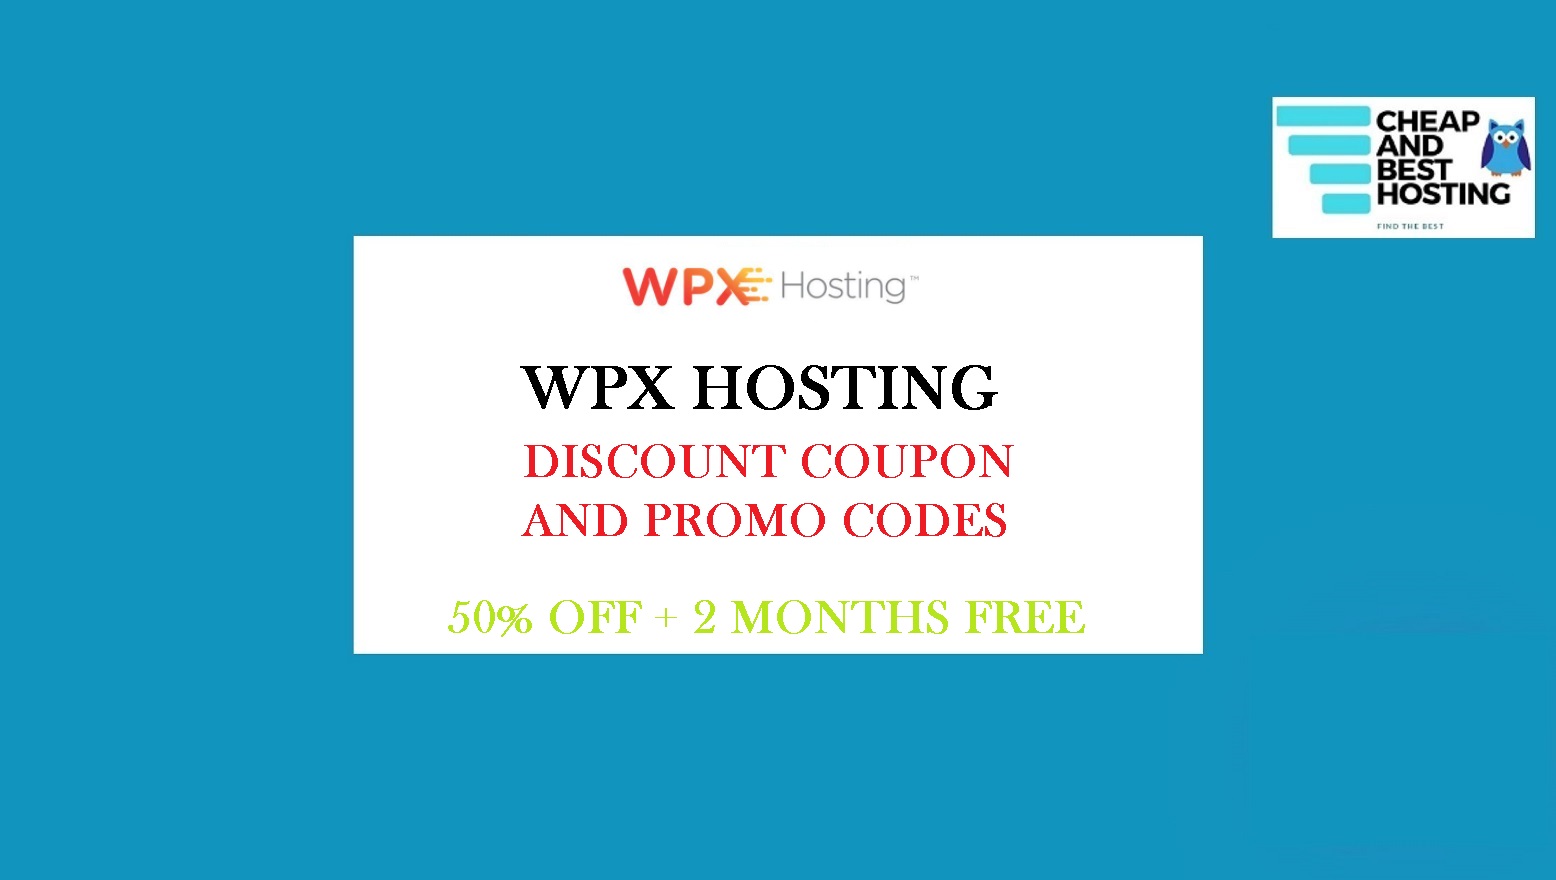 Super Saver WPX Hosting Coupon, Live WPX Promo Codes, Exclusive WPX Hosting Discount Coupons